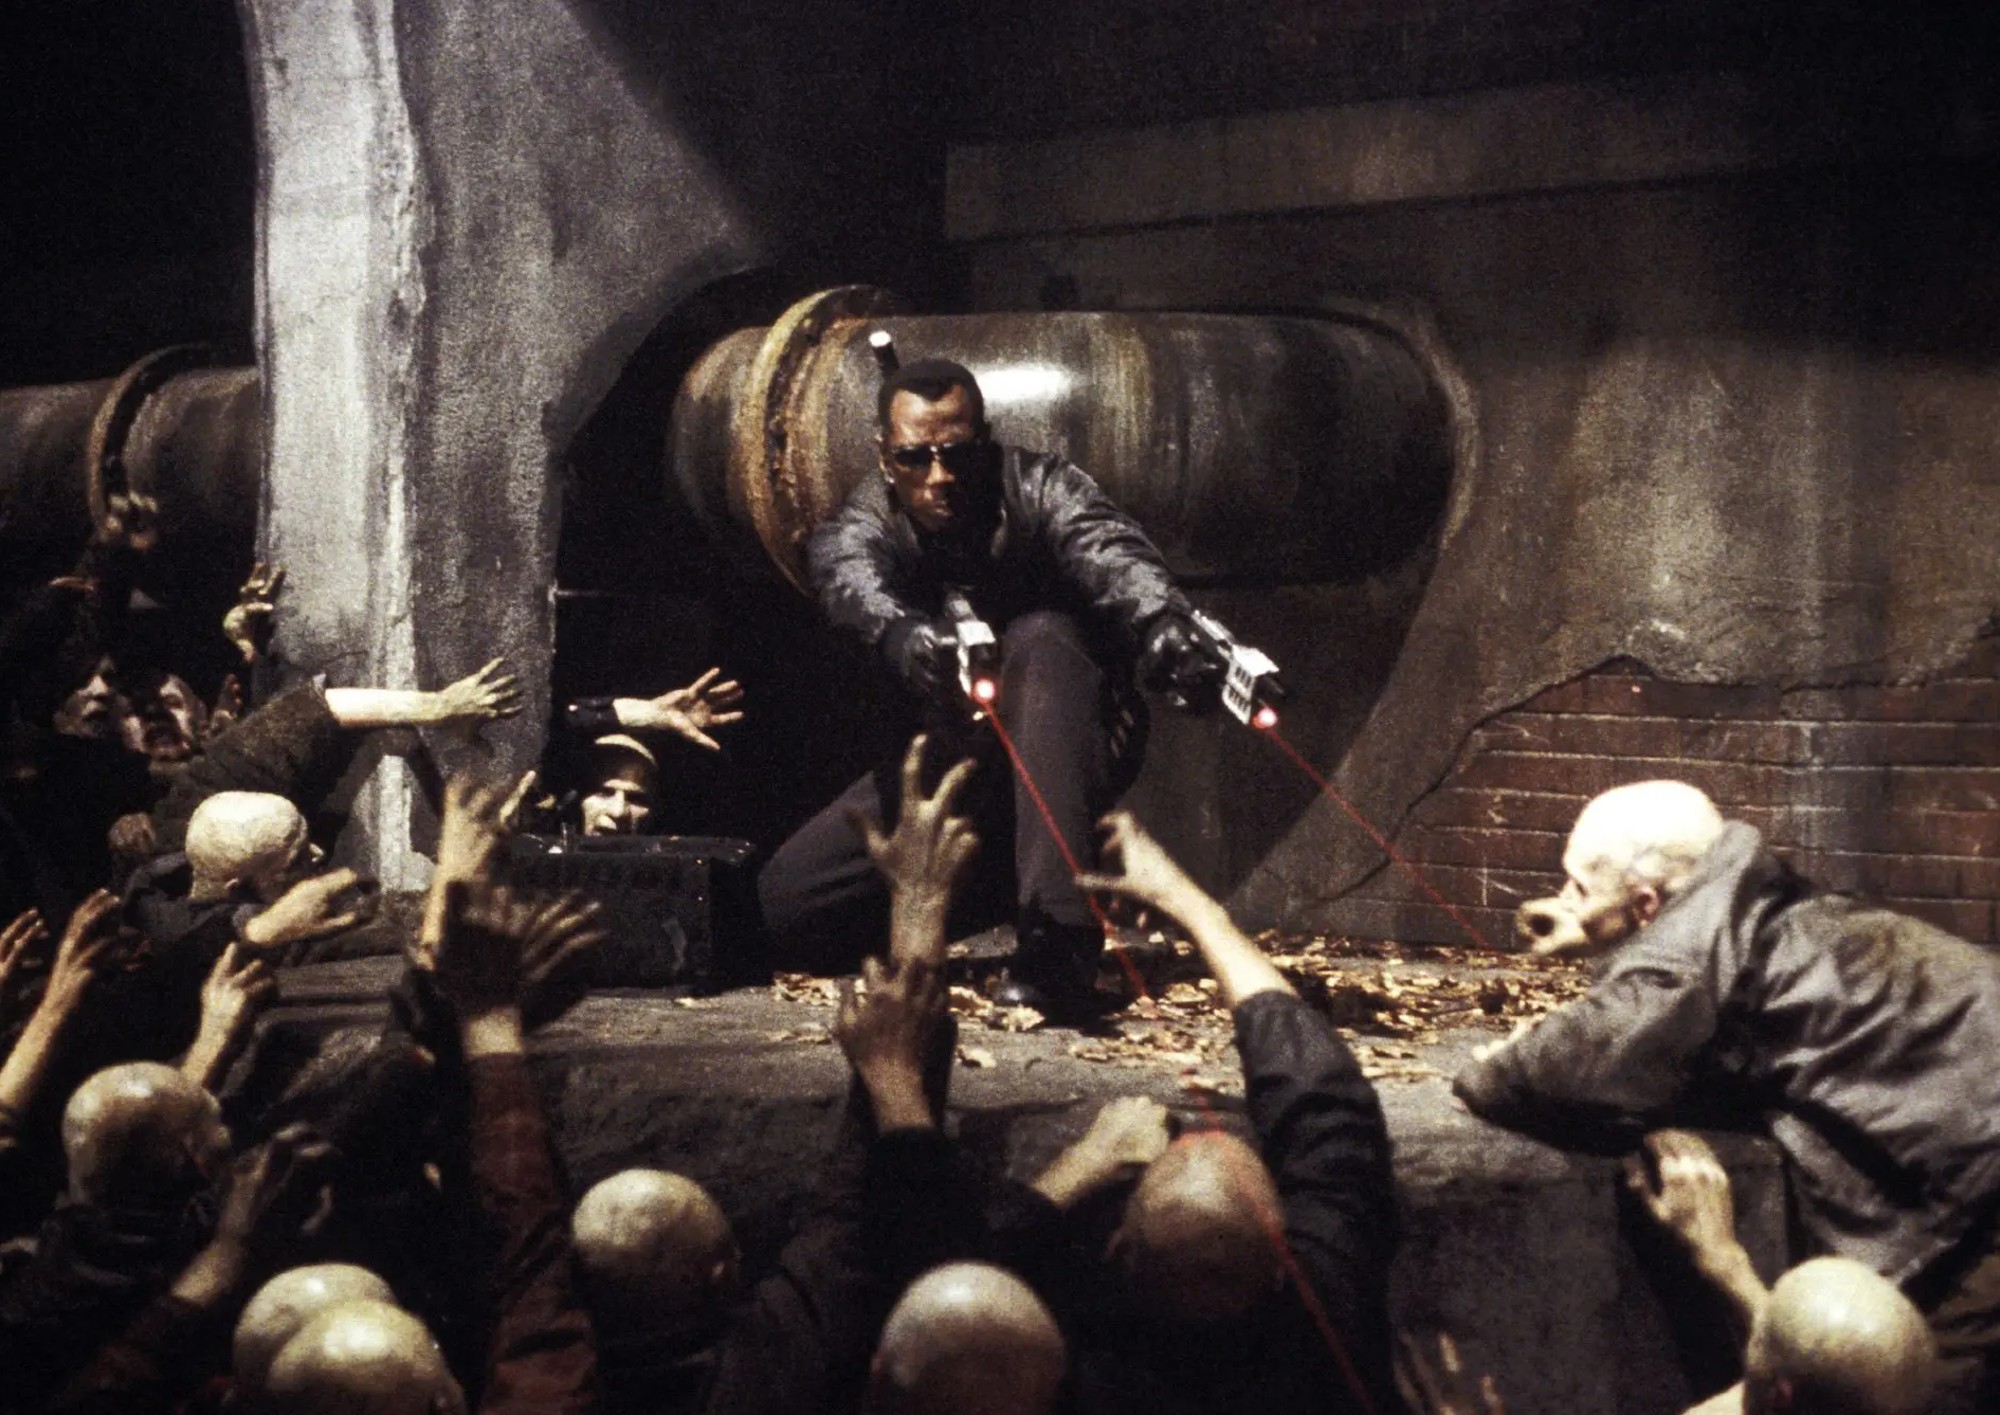 Image from the motion picture Blade II